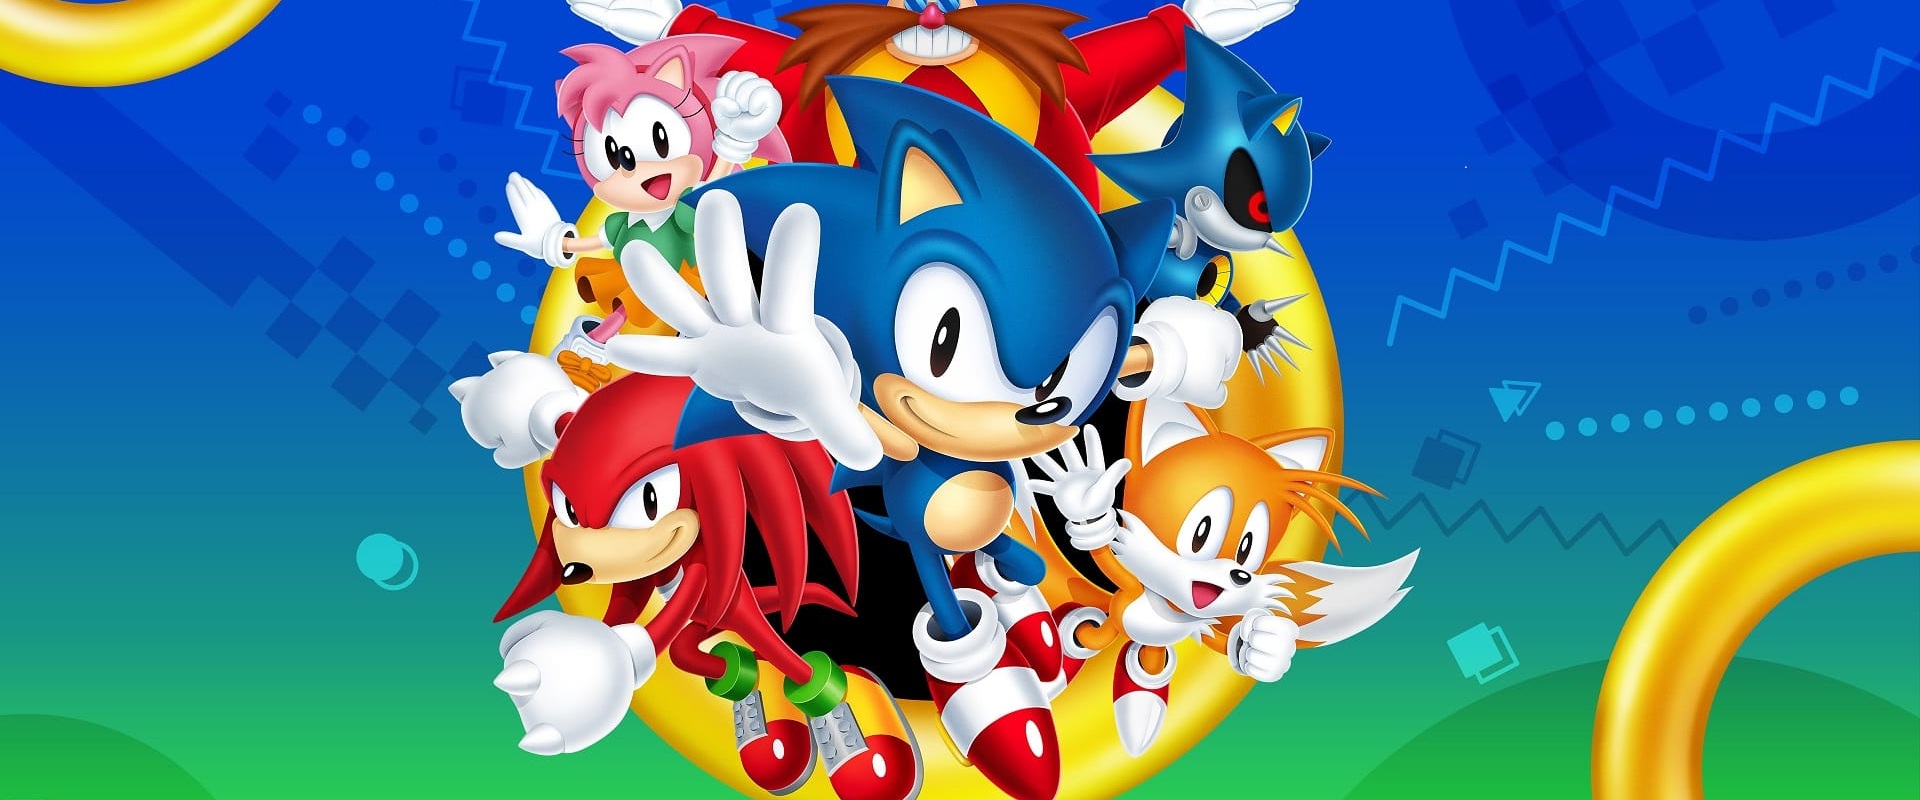 Sonic the Hedgehog: A Look at the Classic 2D Platformer